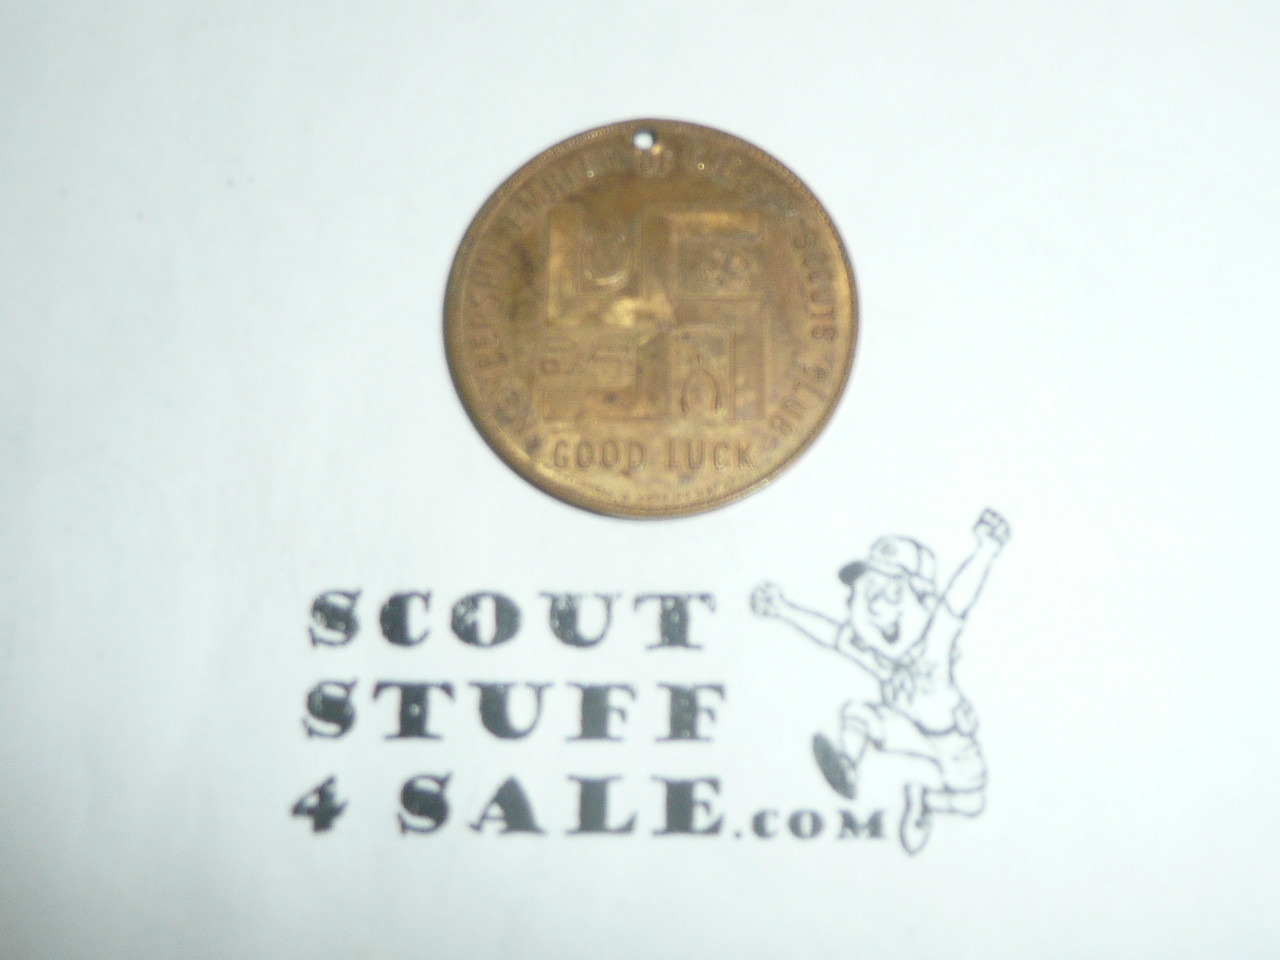 Excelsior Shoe Company Teens Boy Scout Coin / Token , Version 3 in very good condition